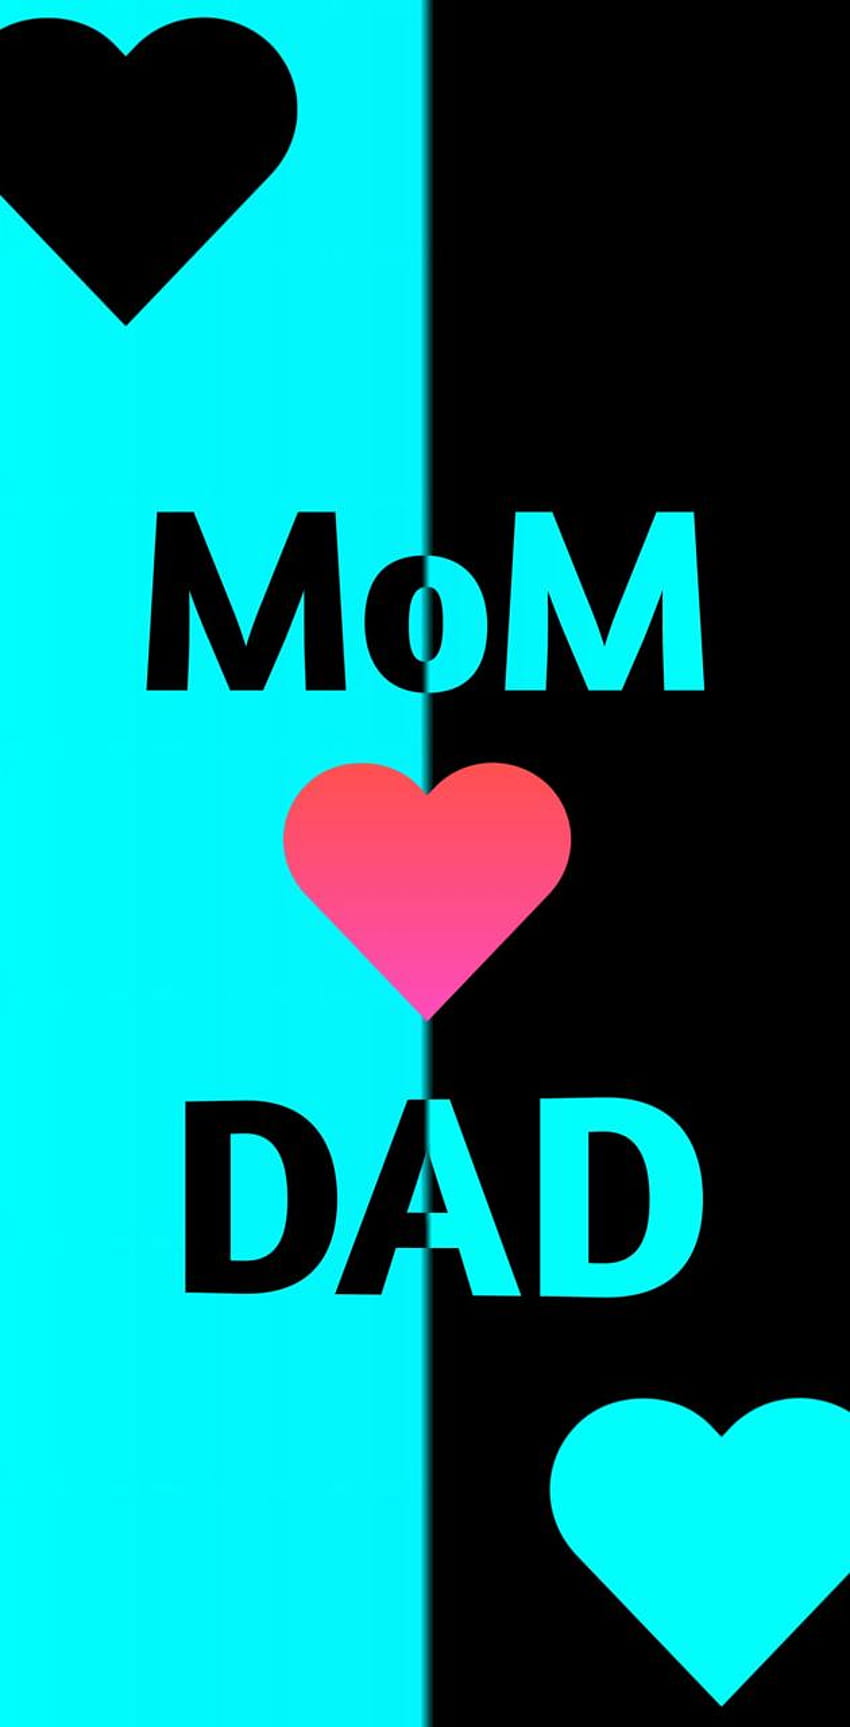 Mom Dad by illegalGaming, mother love phone HD phone wallpaper